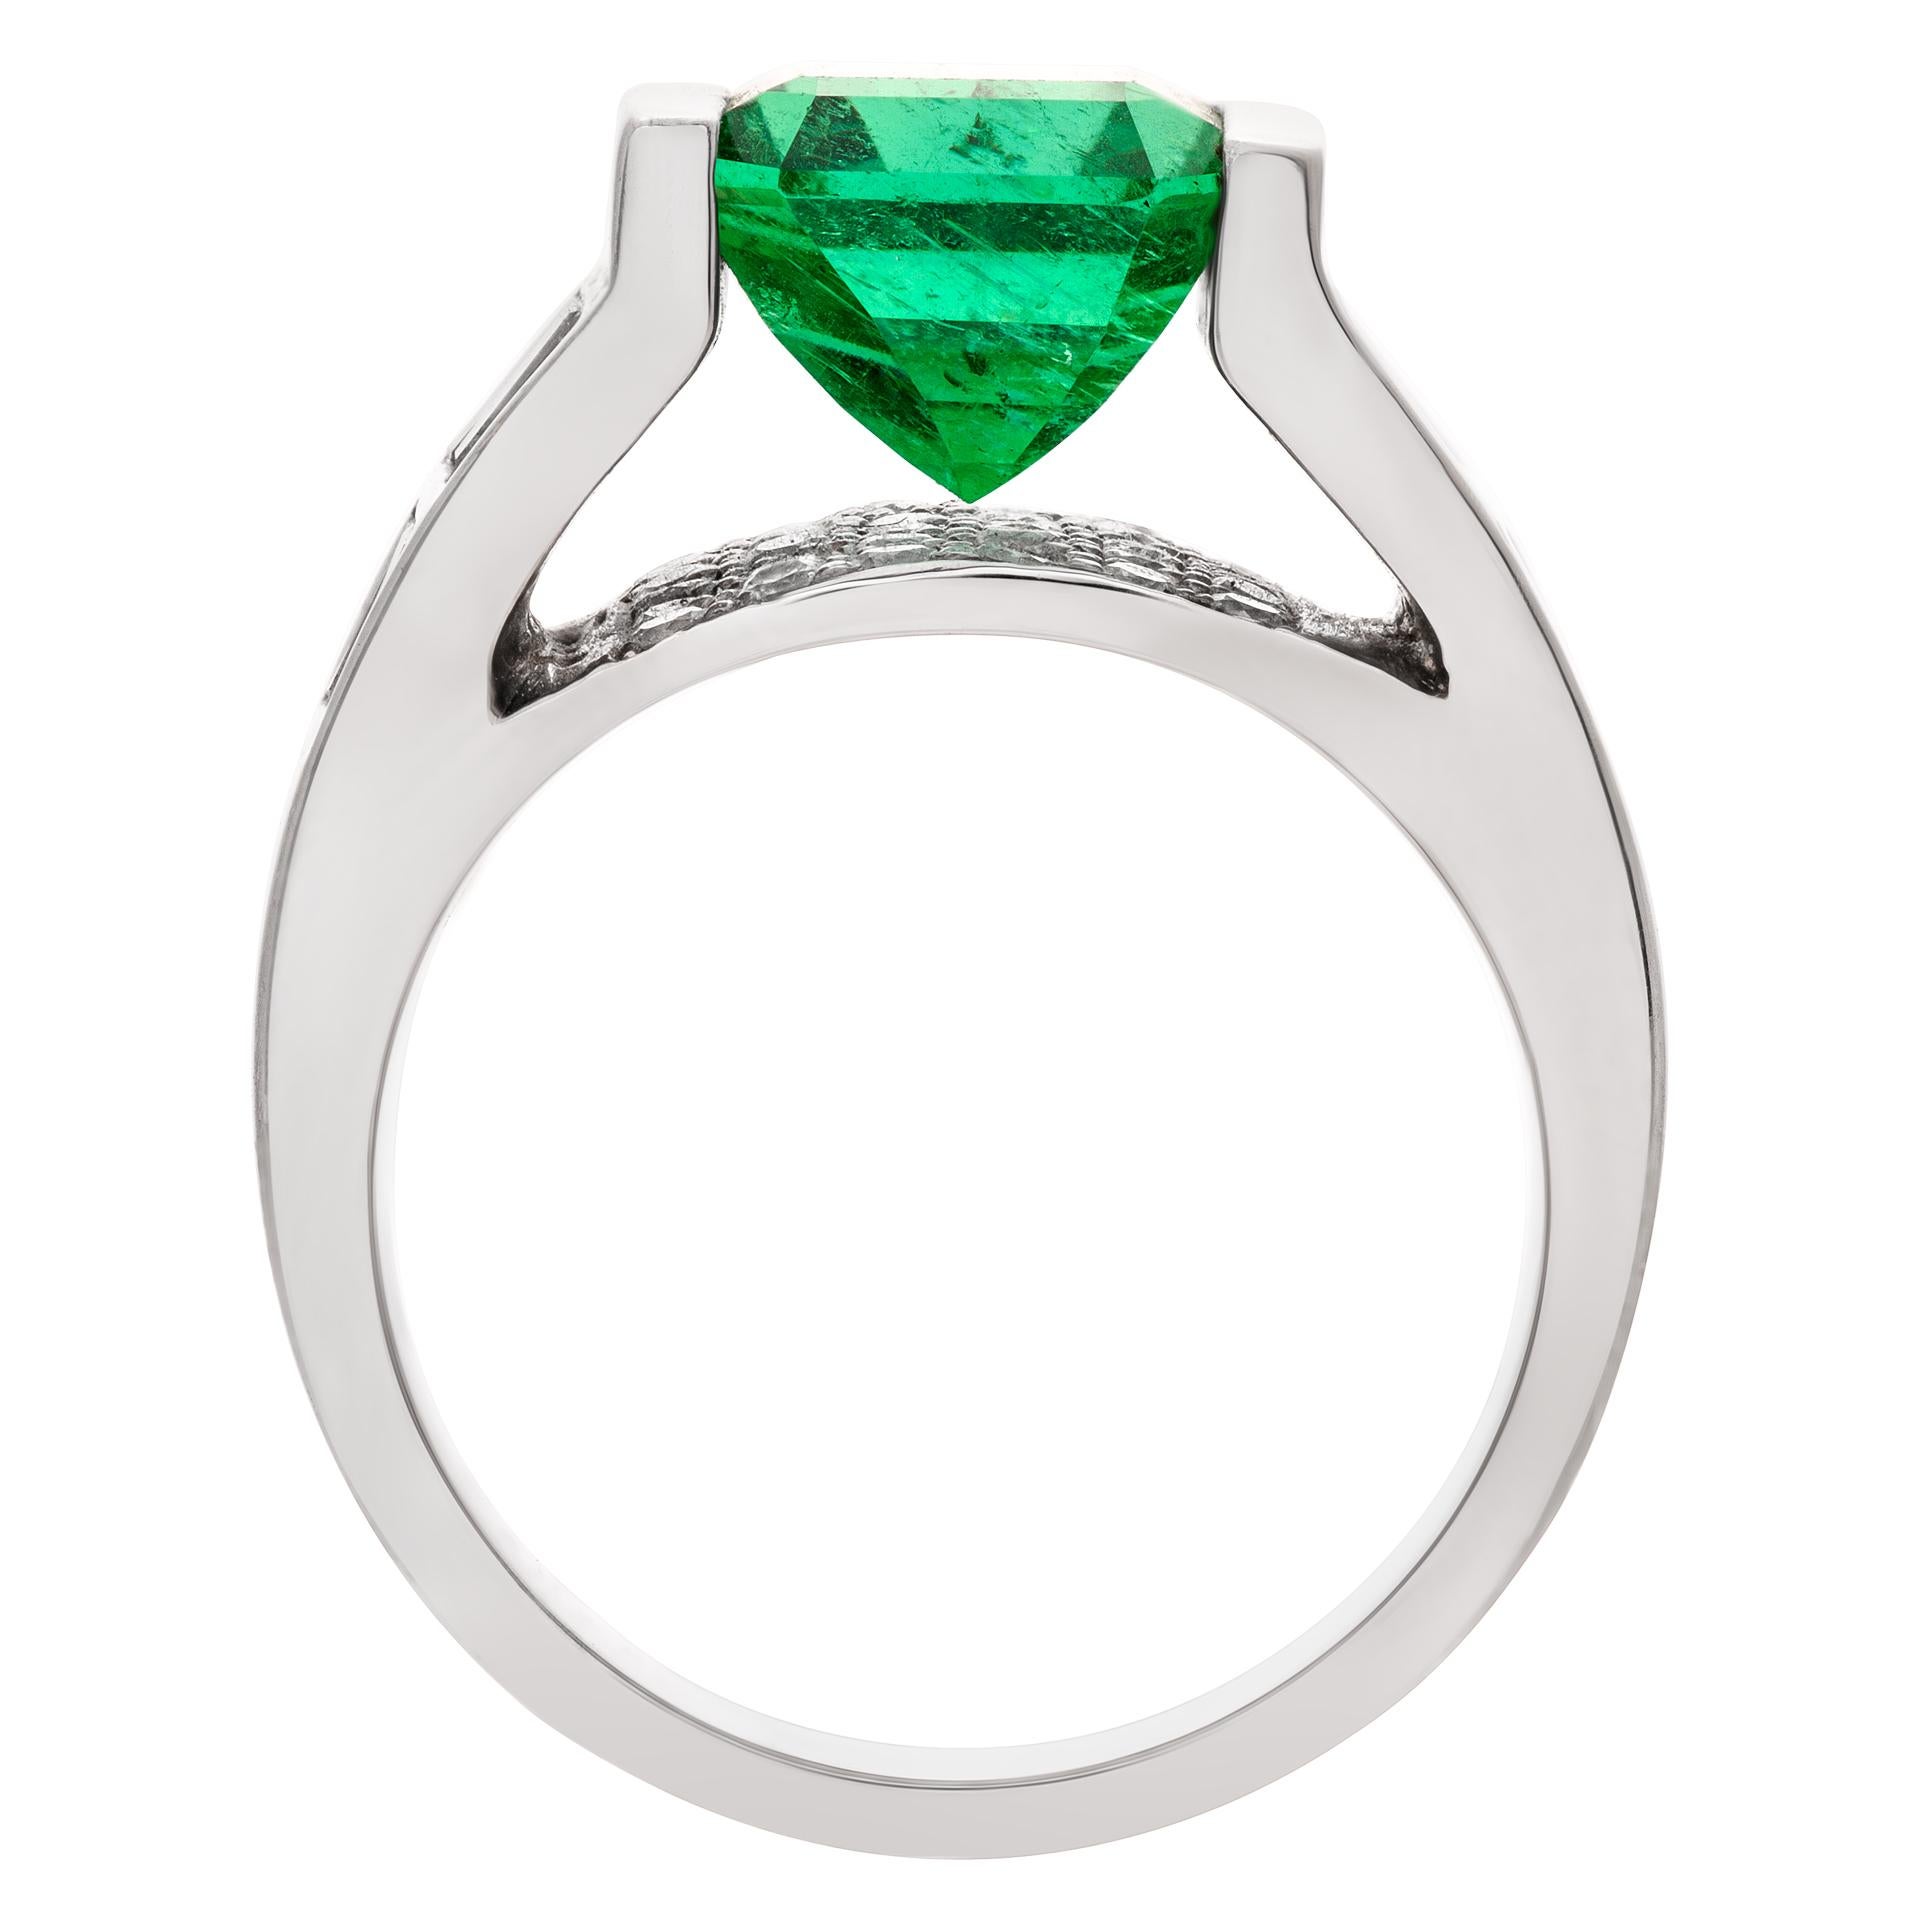 ESTIMATED RETAIL: $16,000.00  YOUR PRICE: $9,060.00 Gorgeous tension set emerald ring in 14k white gold with an app. 3.16 ct green emerald with approximately 1.05 carats in diamonds accents. Size 6.

